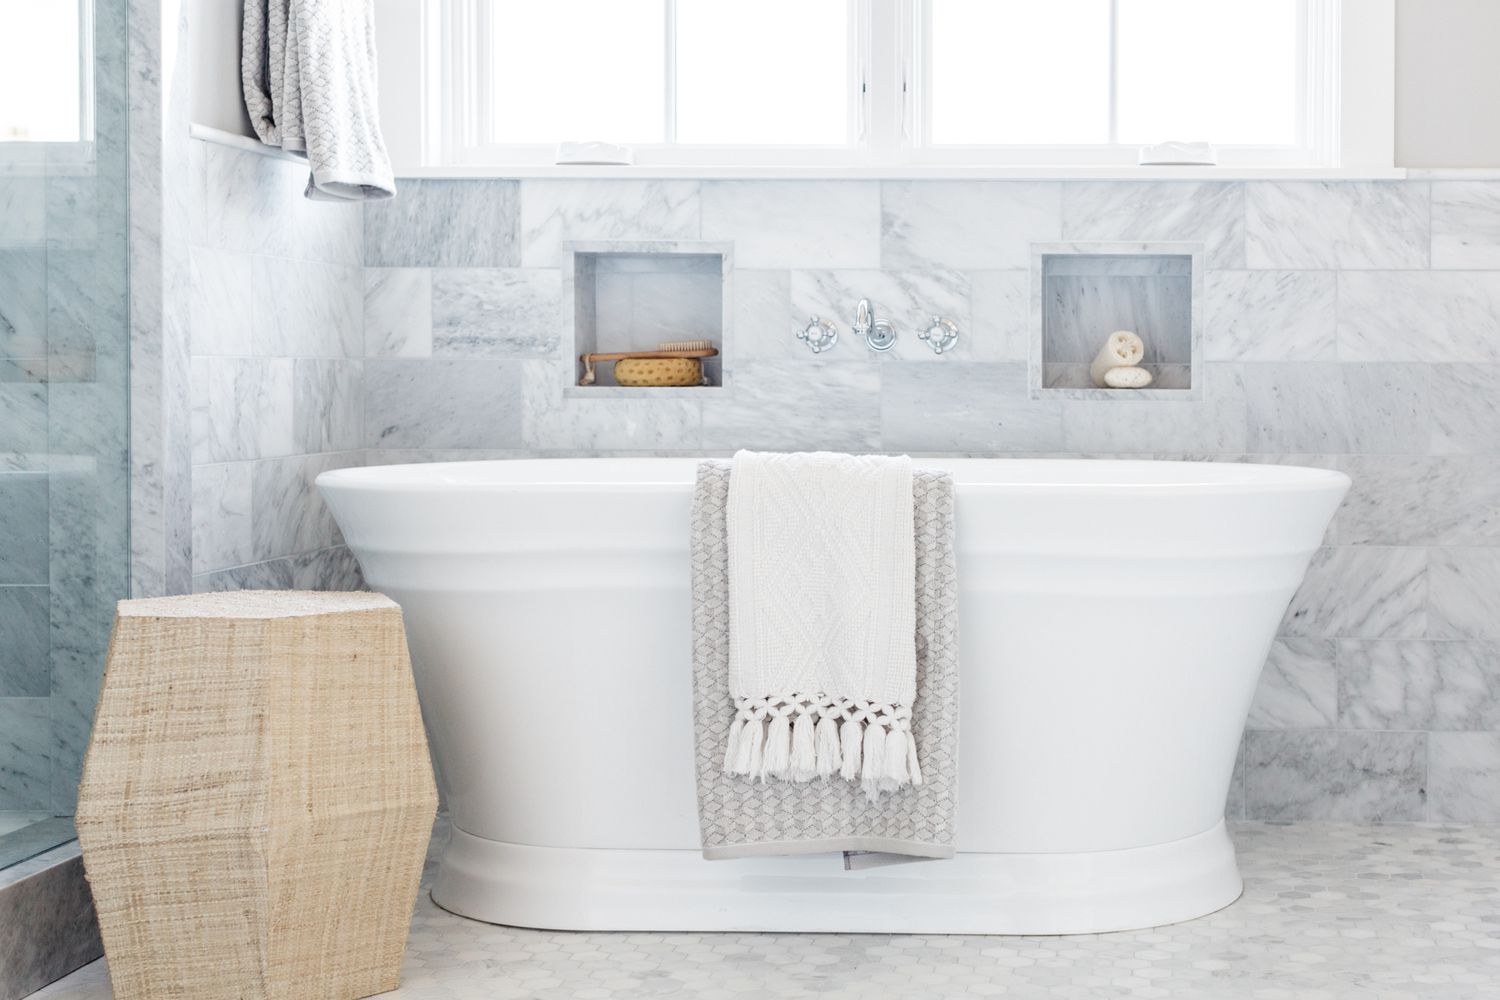 White bath tub with folded towels hanging over edge